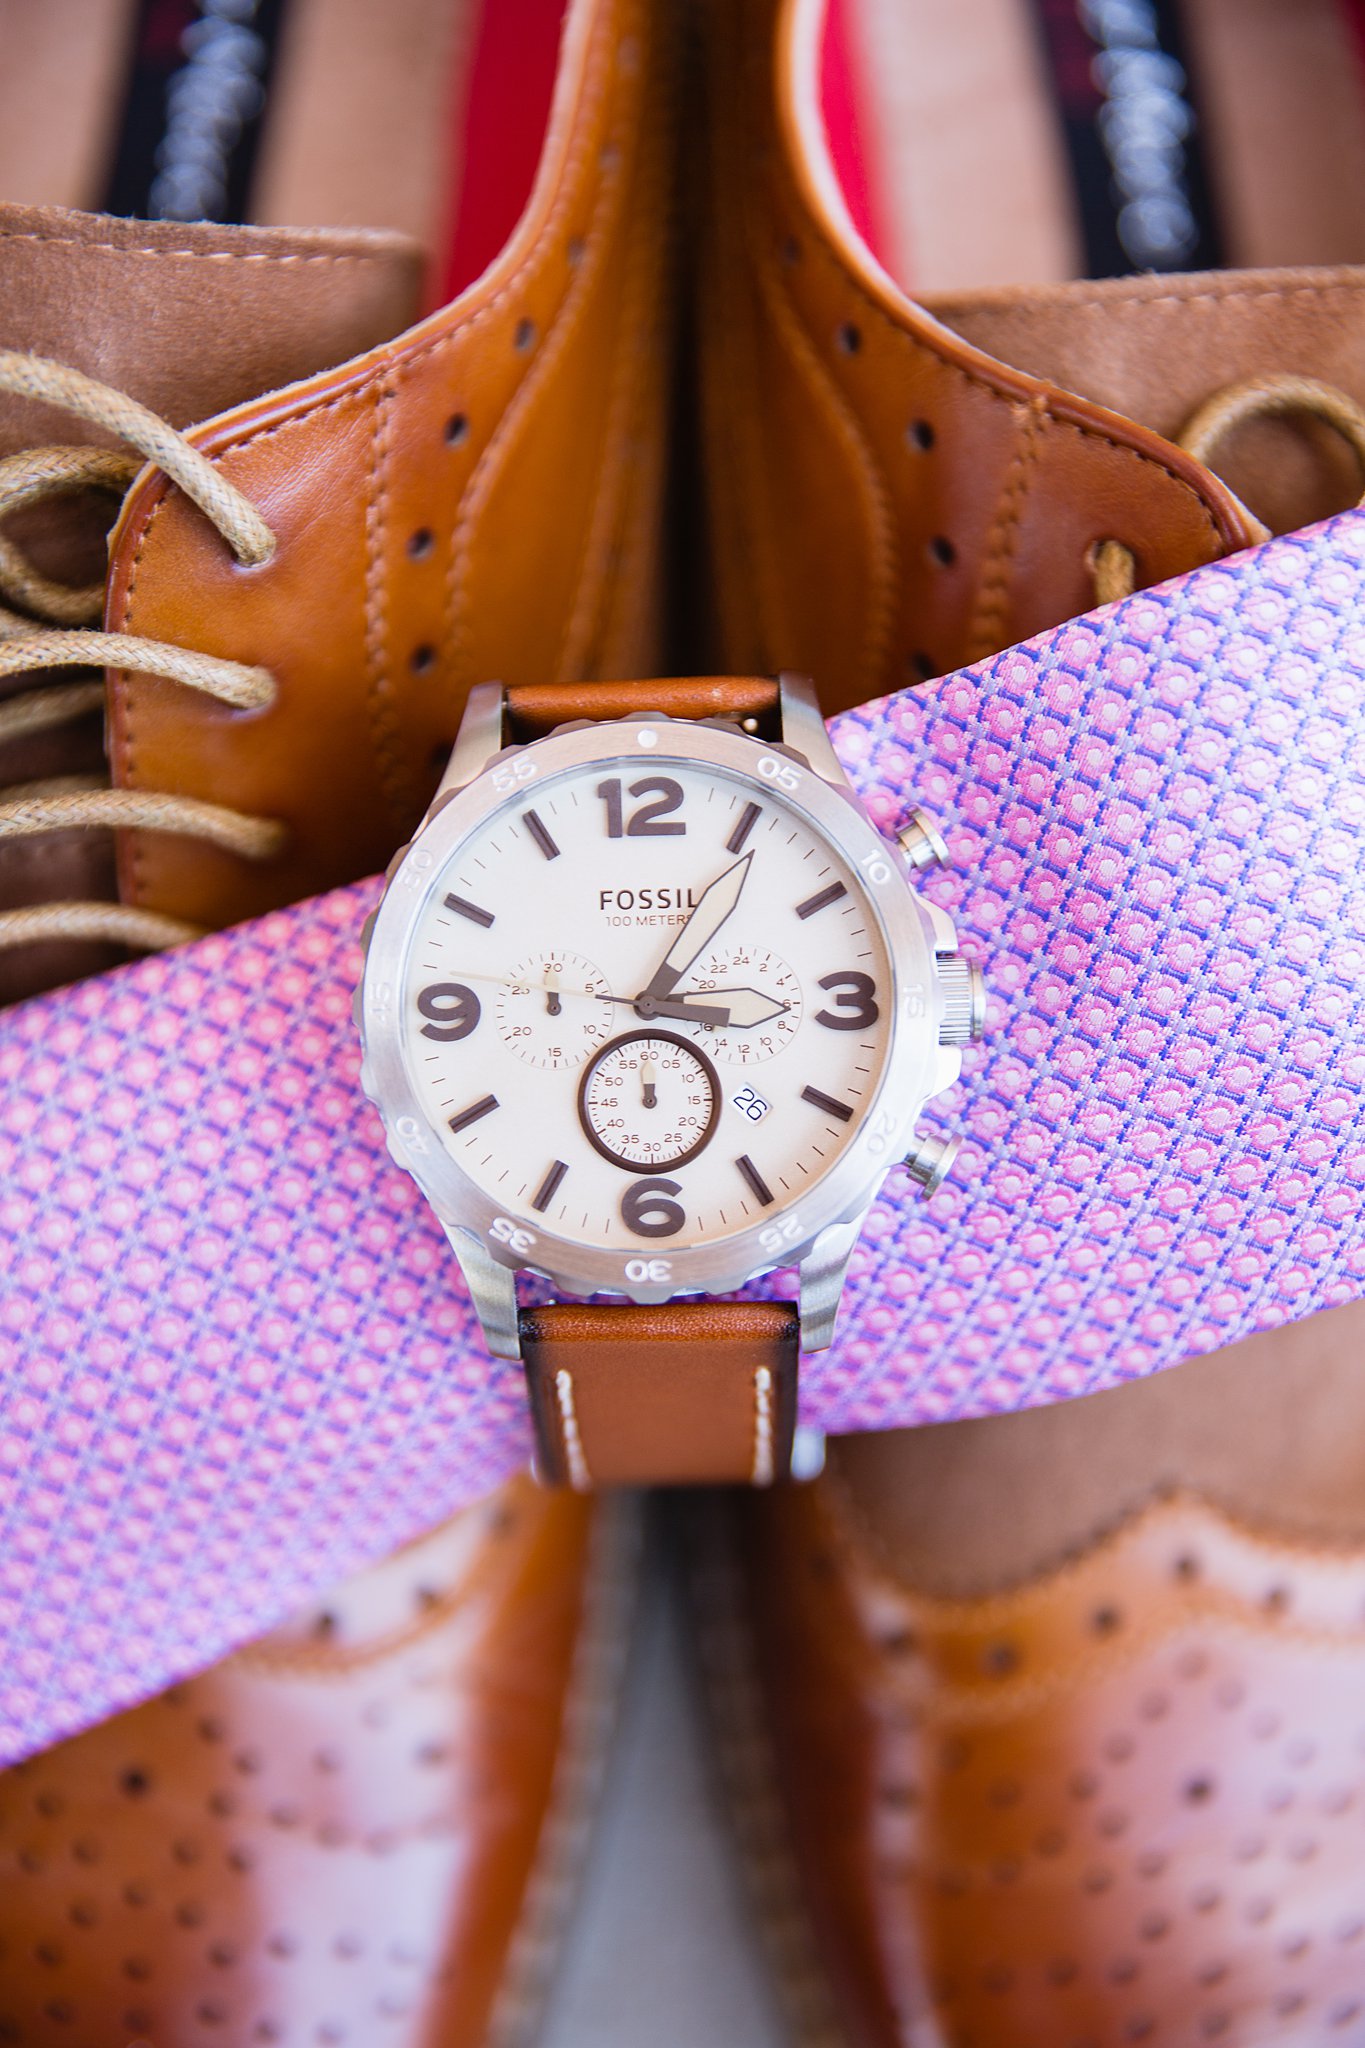 Groom's wedding day details of tan watch and pink tie by PMA Photography.